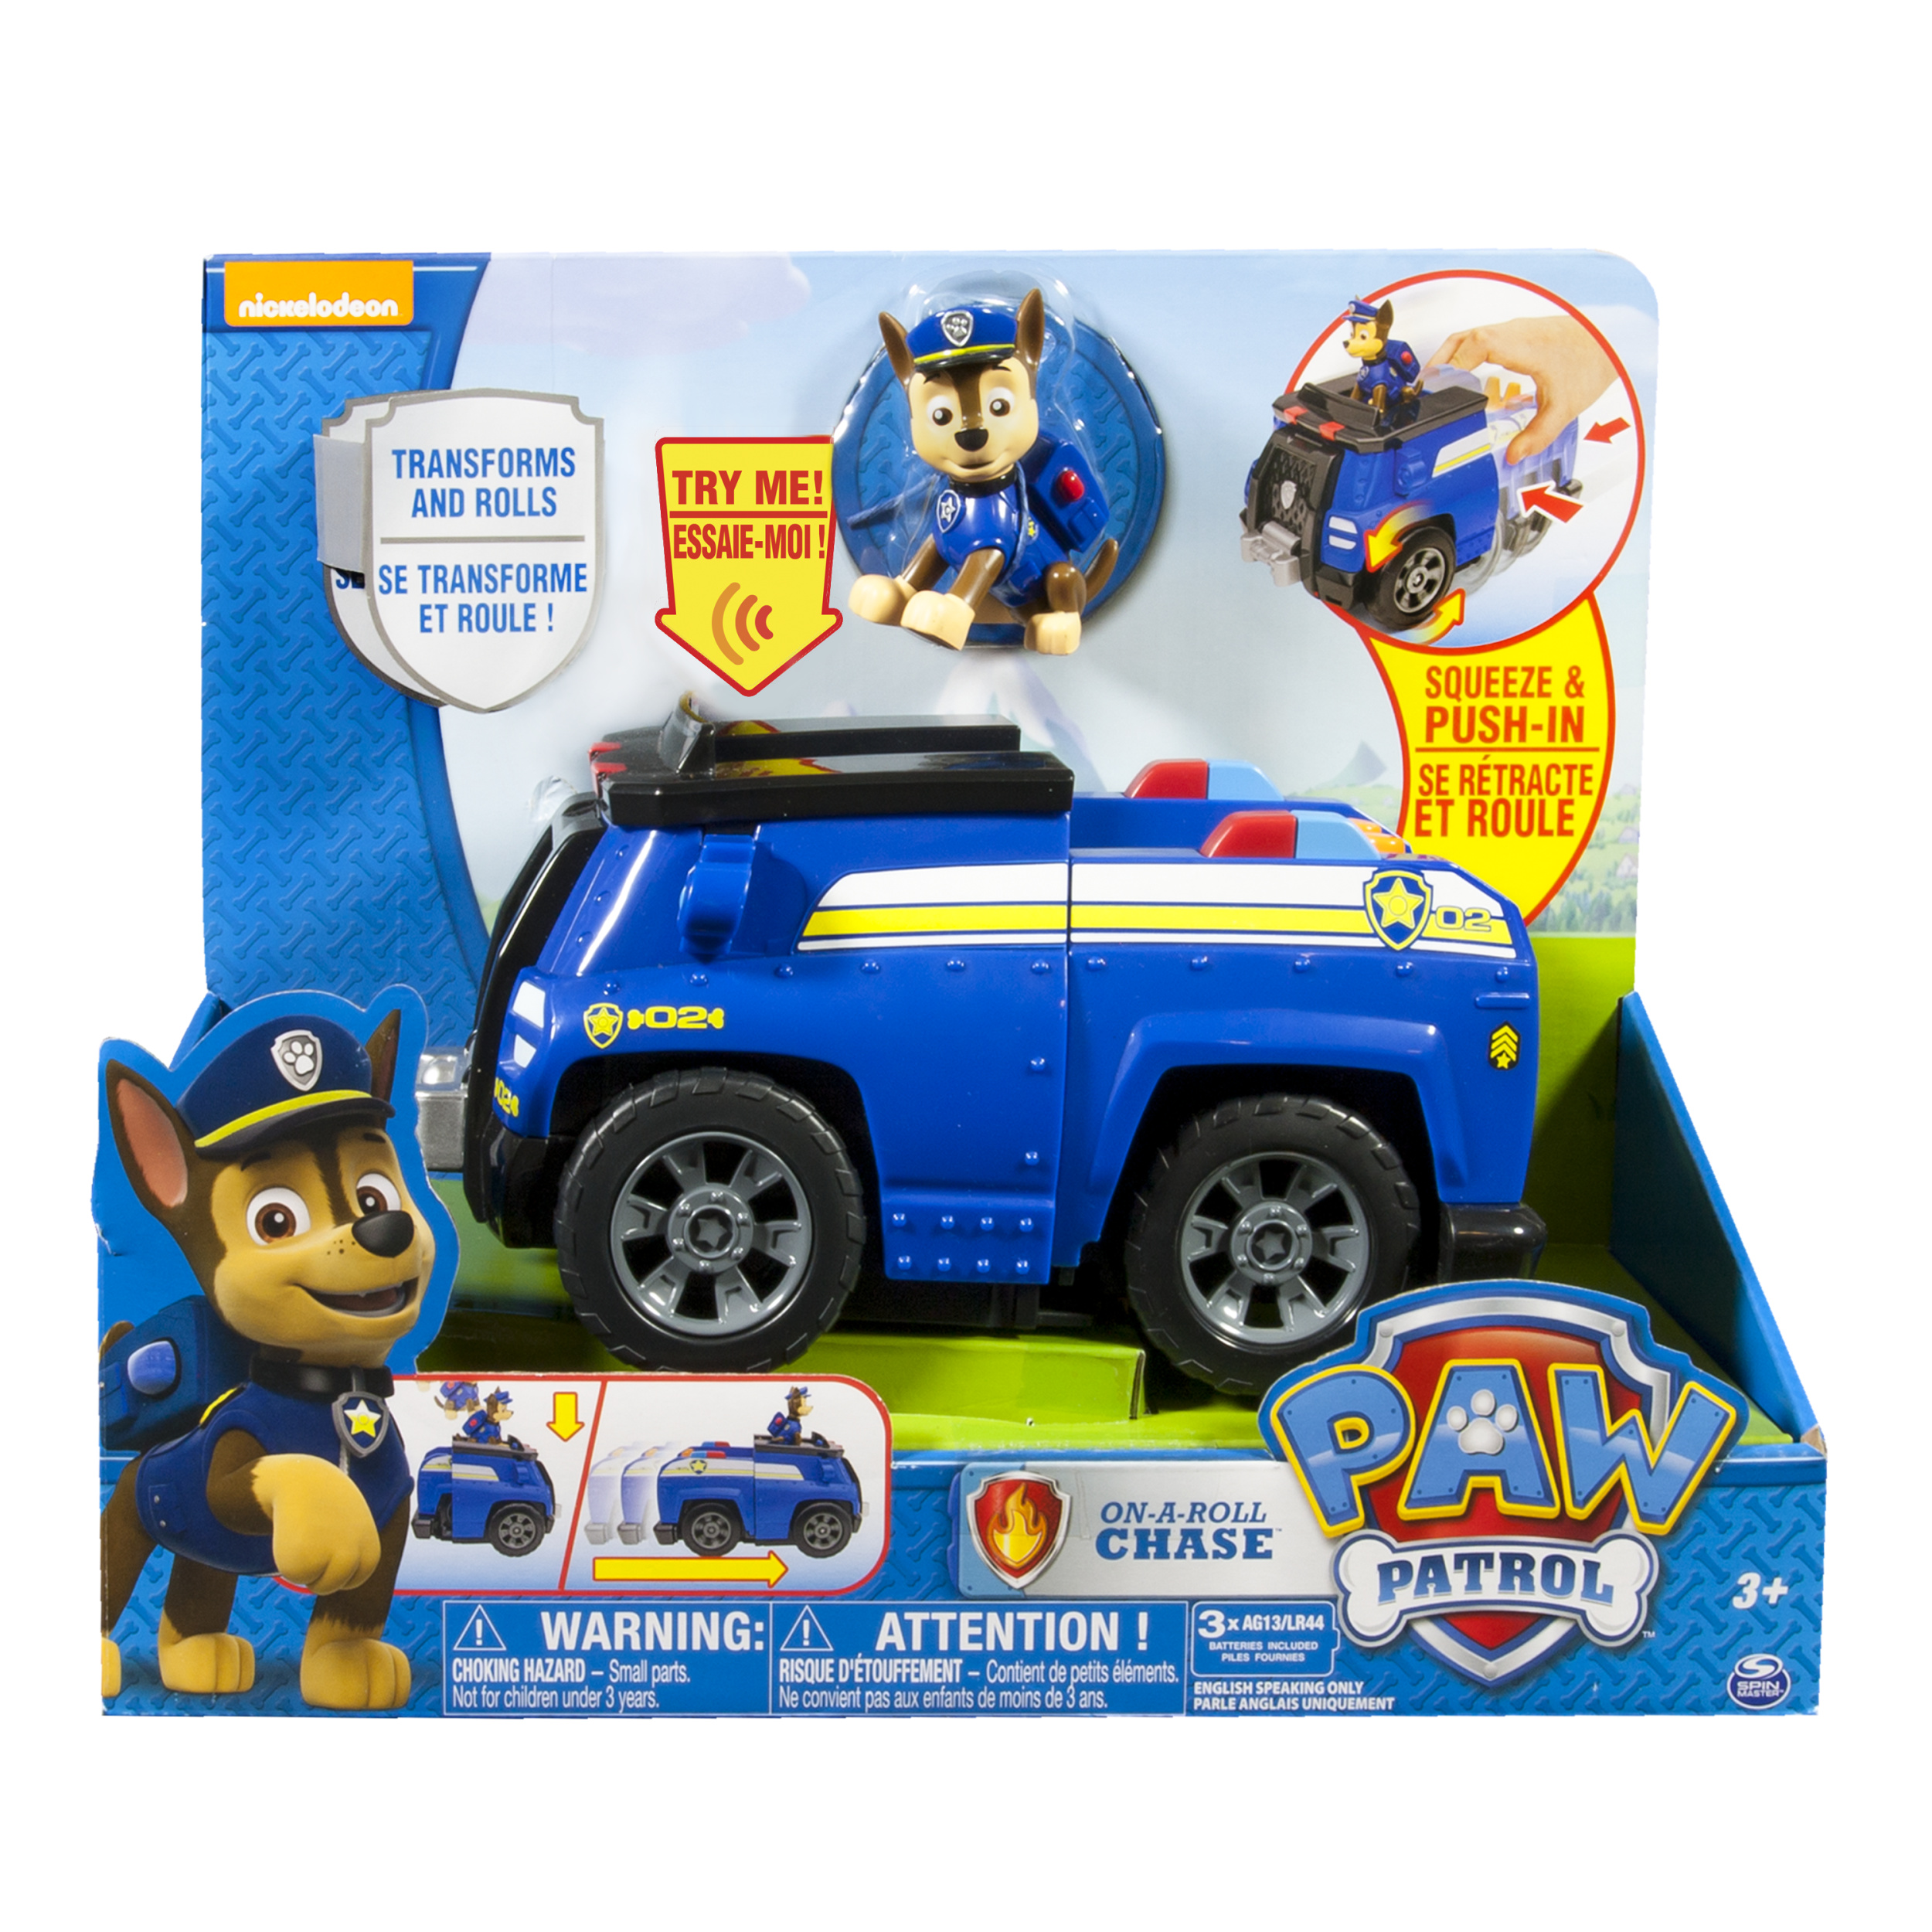 Paw Patrol On a Roll Chase, Figure and Vehicle with Sounds - image 4 of 5